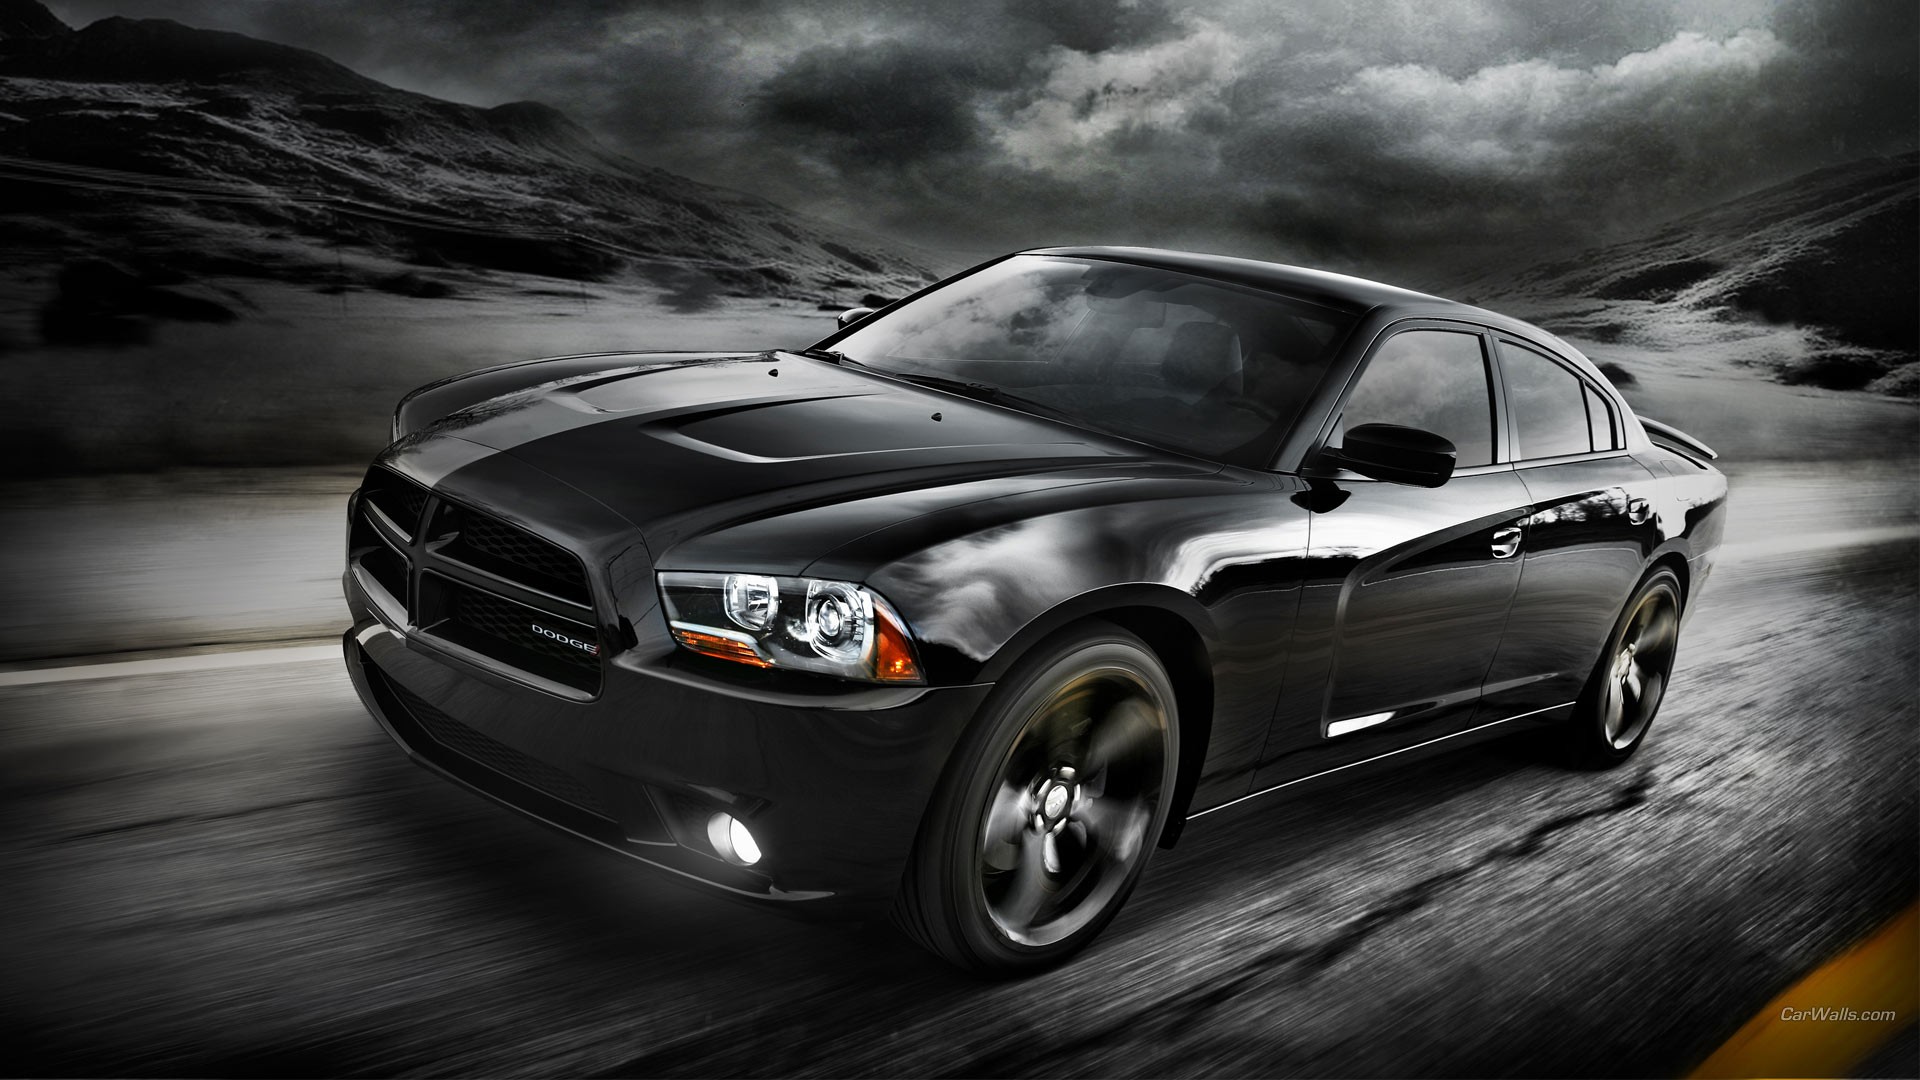 General 1920x1080 Dodge Charger muscle cars car monochrome black cars Dodge American cars